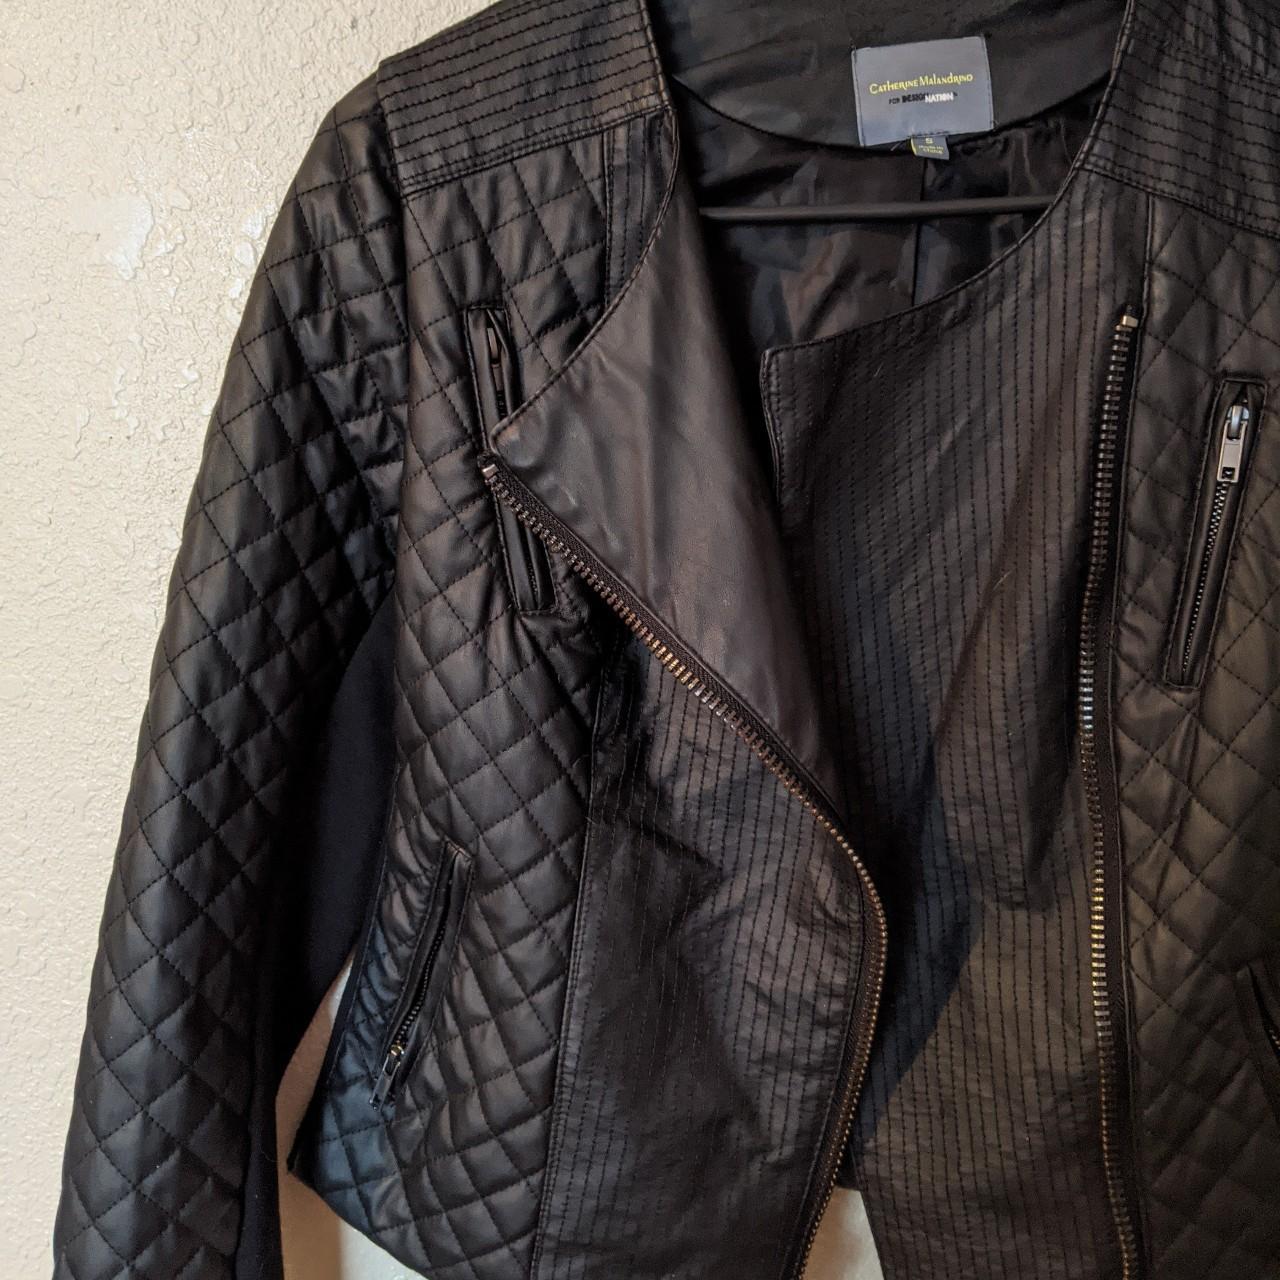 Product Image 3 - Leather Jacket

- Faux Leather
- Quilted